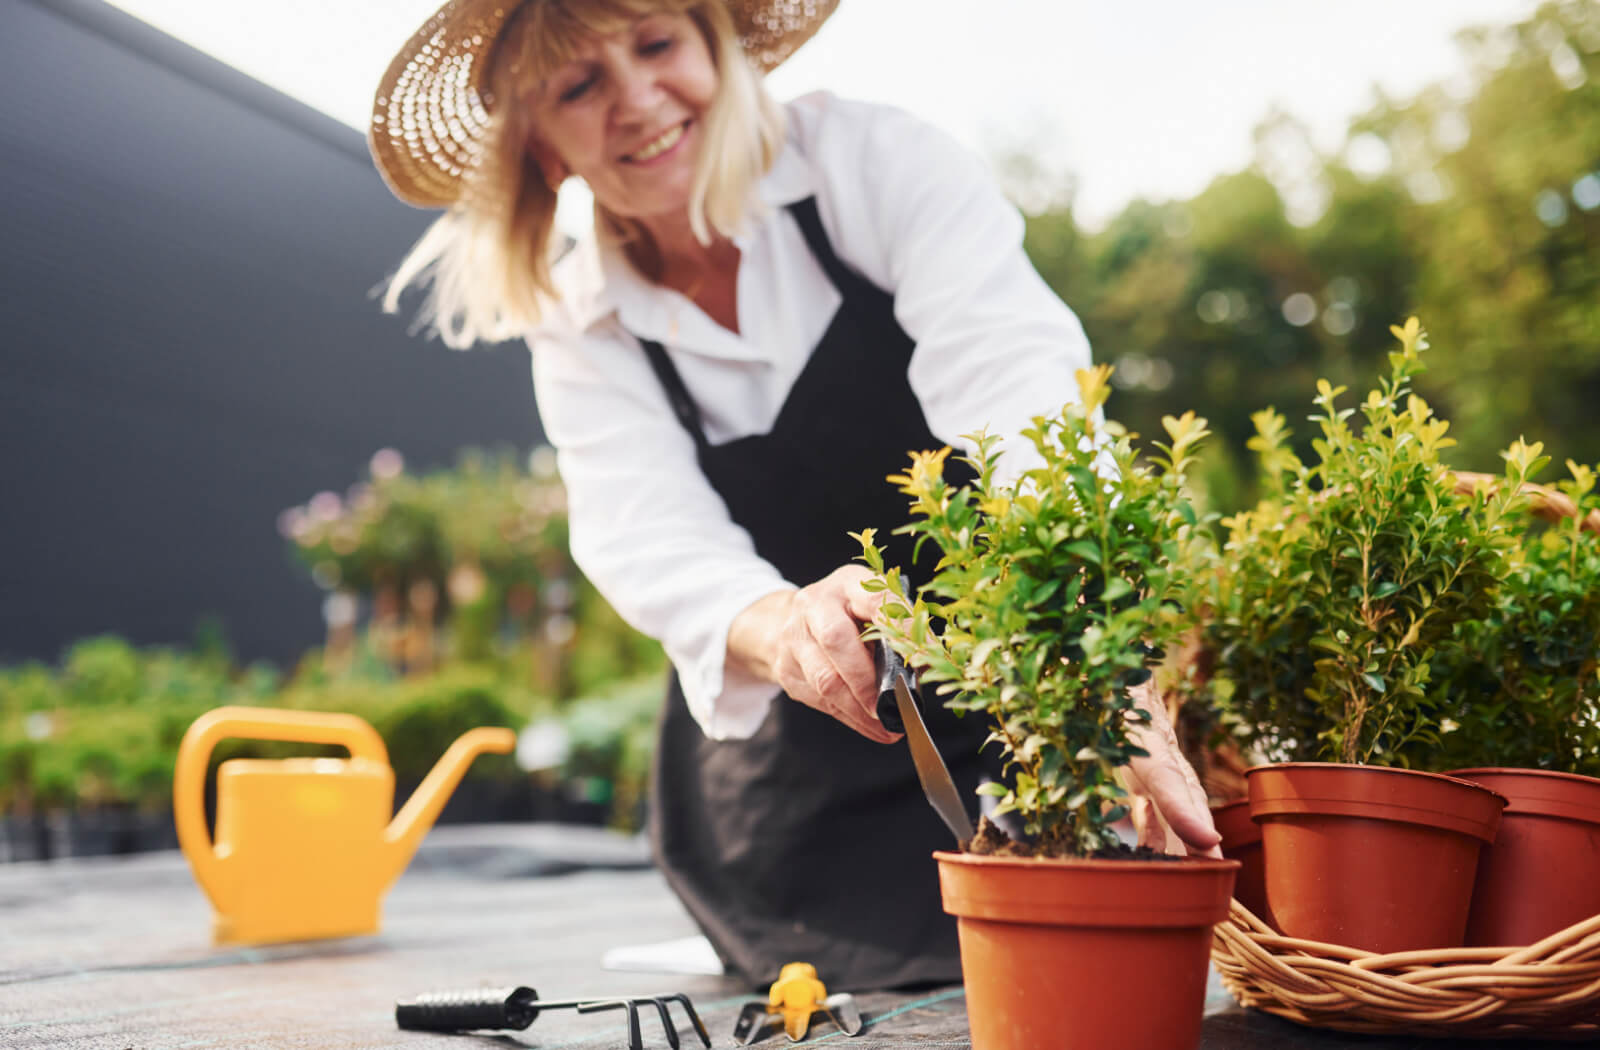 A senior woman re-planting shrubs in pots in the garden.